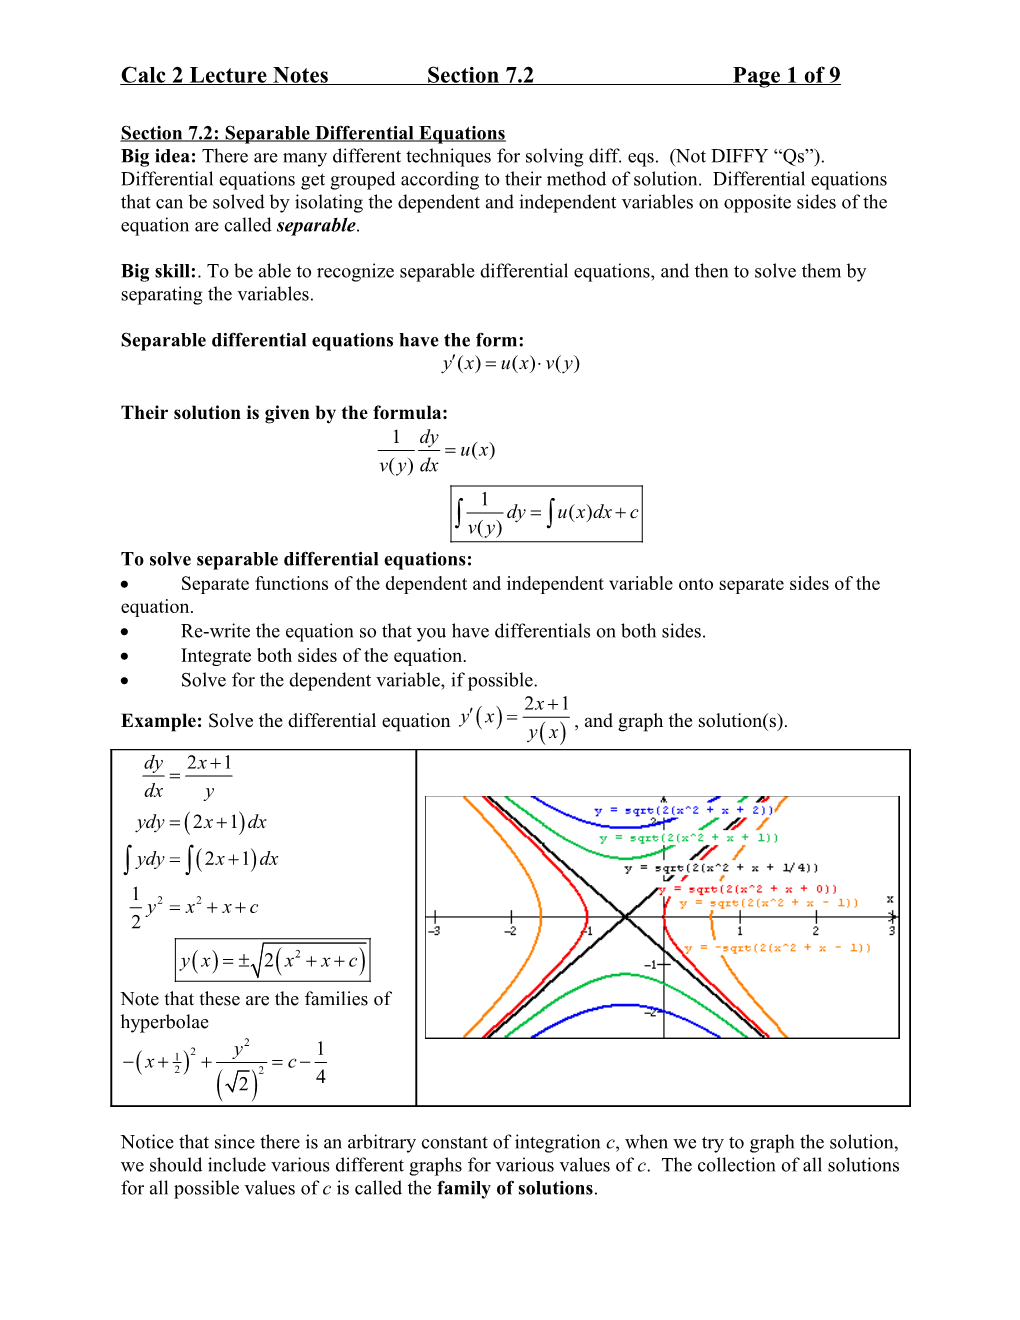 Calculus 2 Lecture Notes, Section 7.2